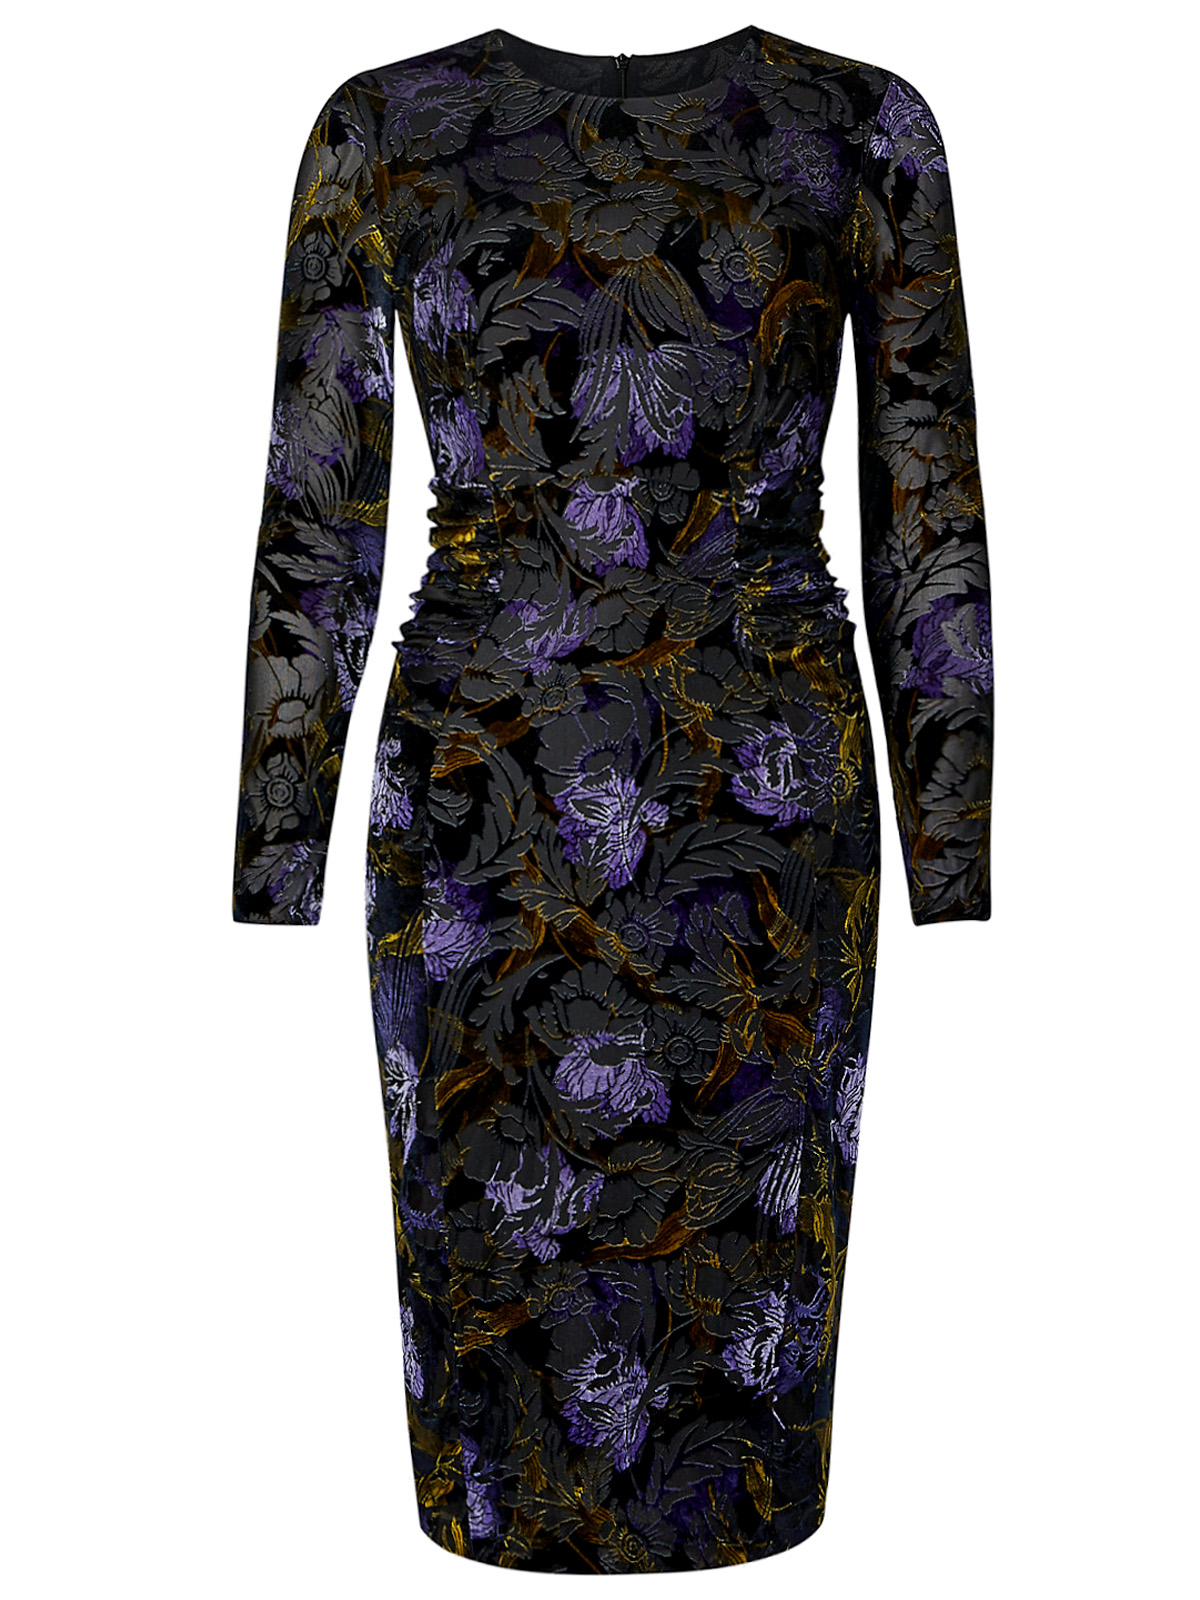 Marks and Spencer - - M&5 BLACK Sophisticated Floral Print Bodycon Midi ...